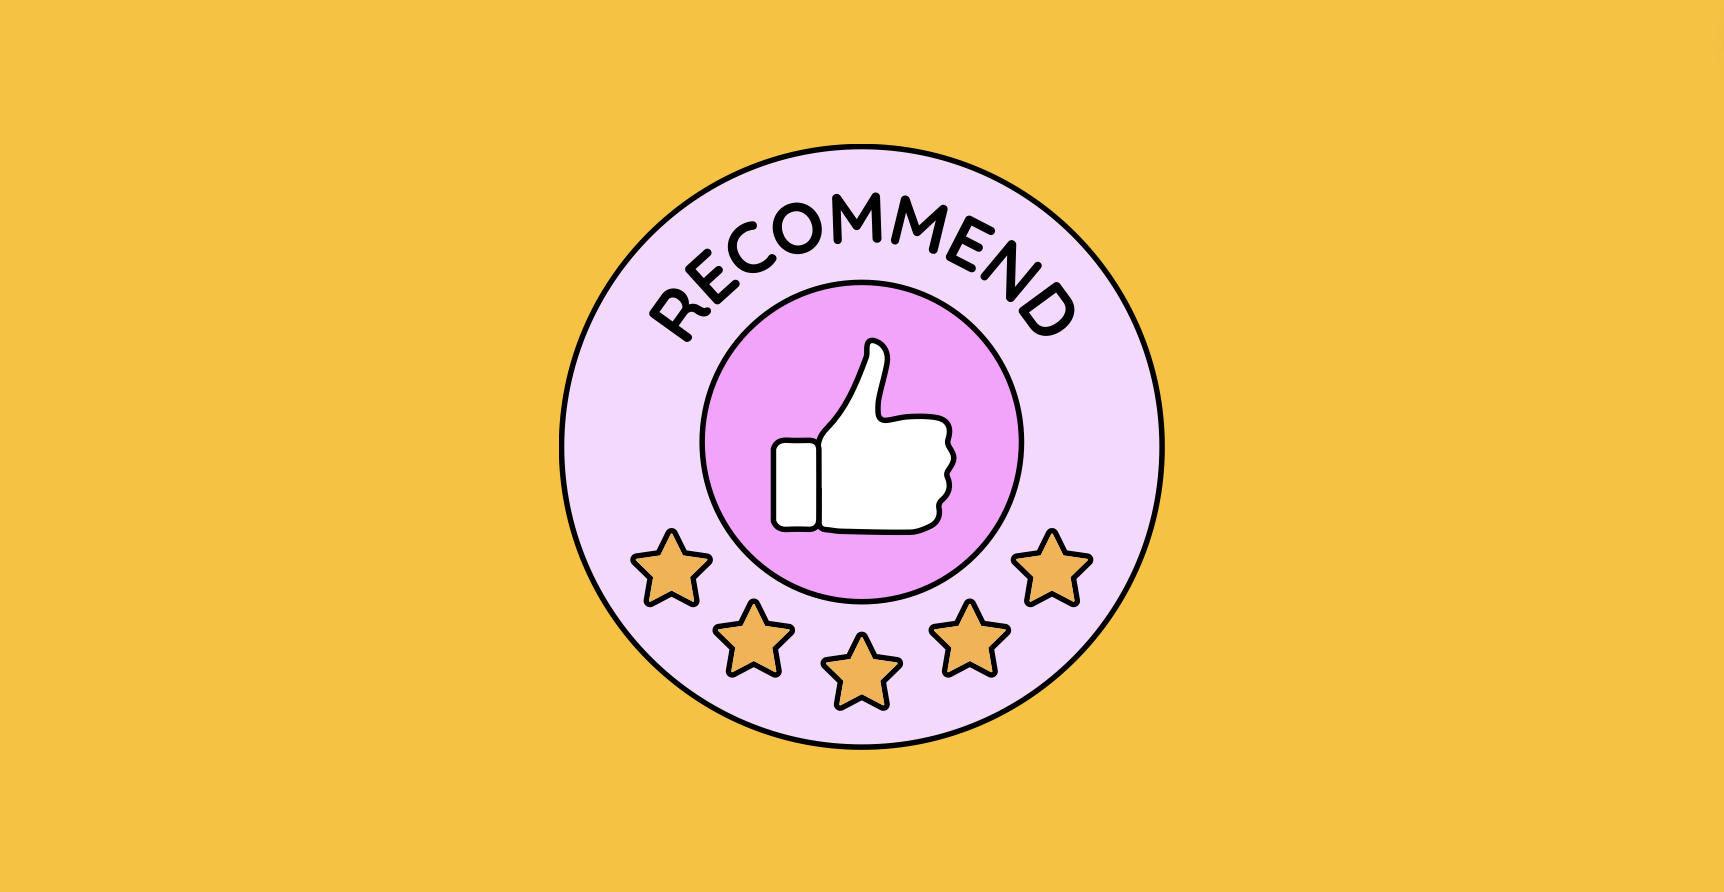 Recommended by WorkplaceHero